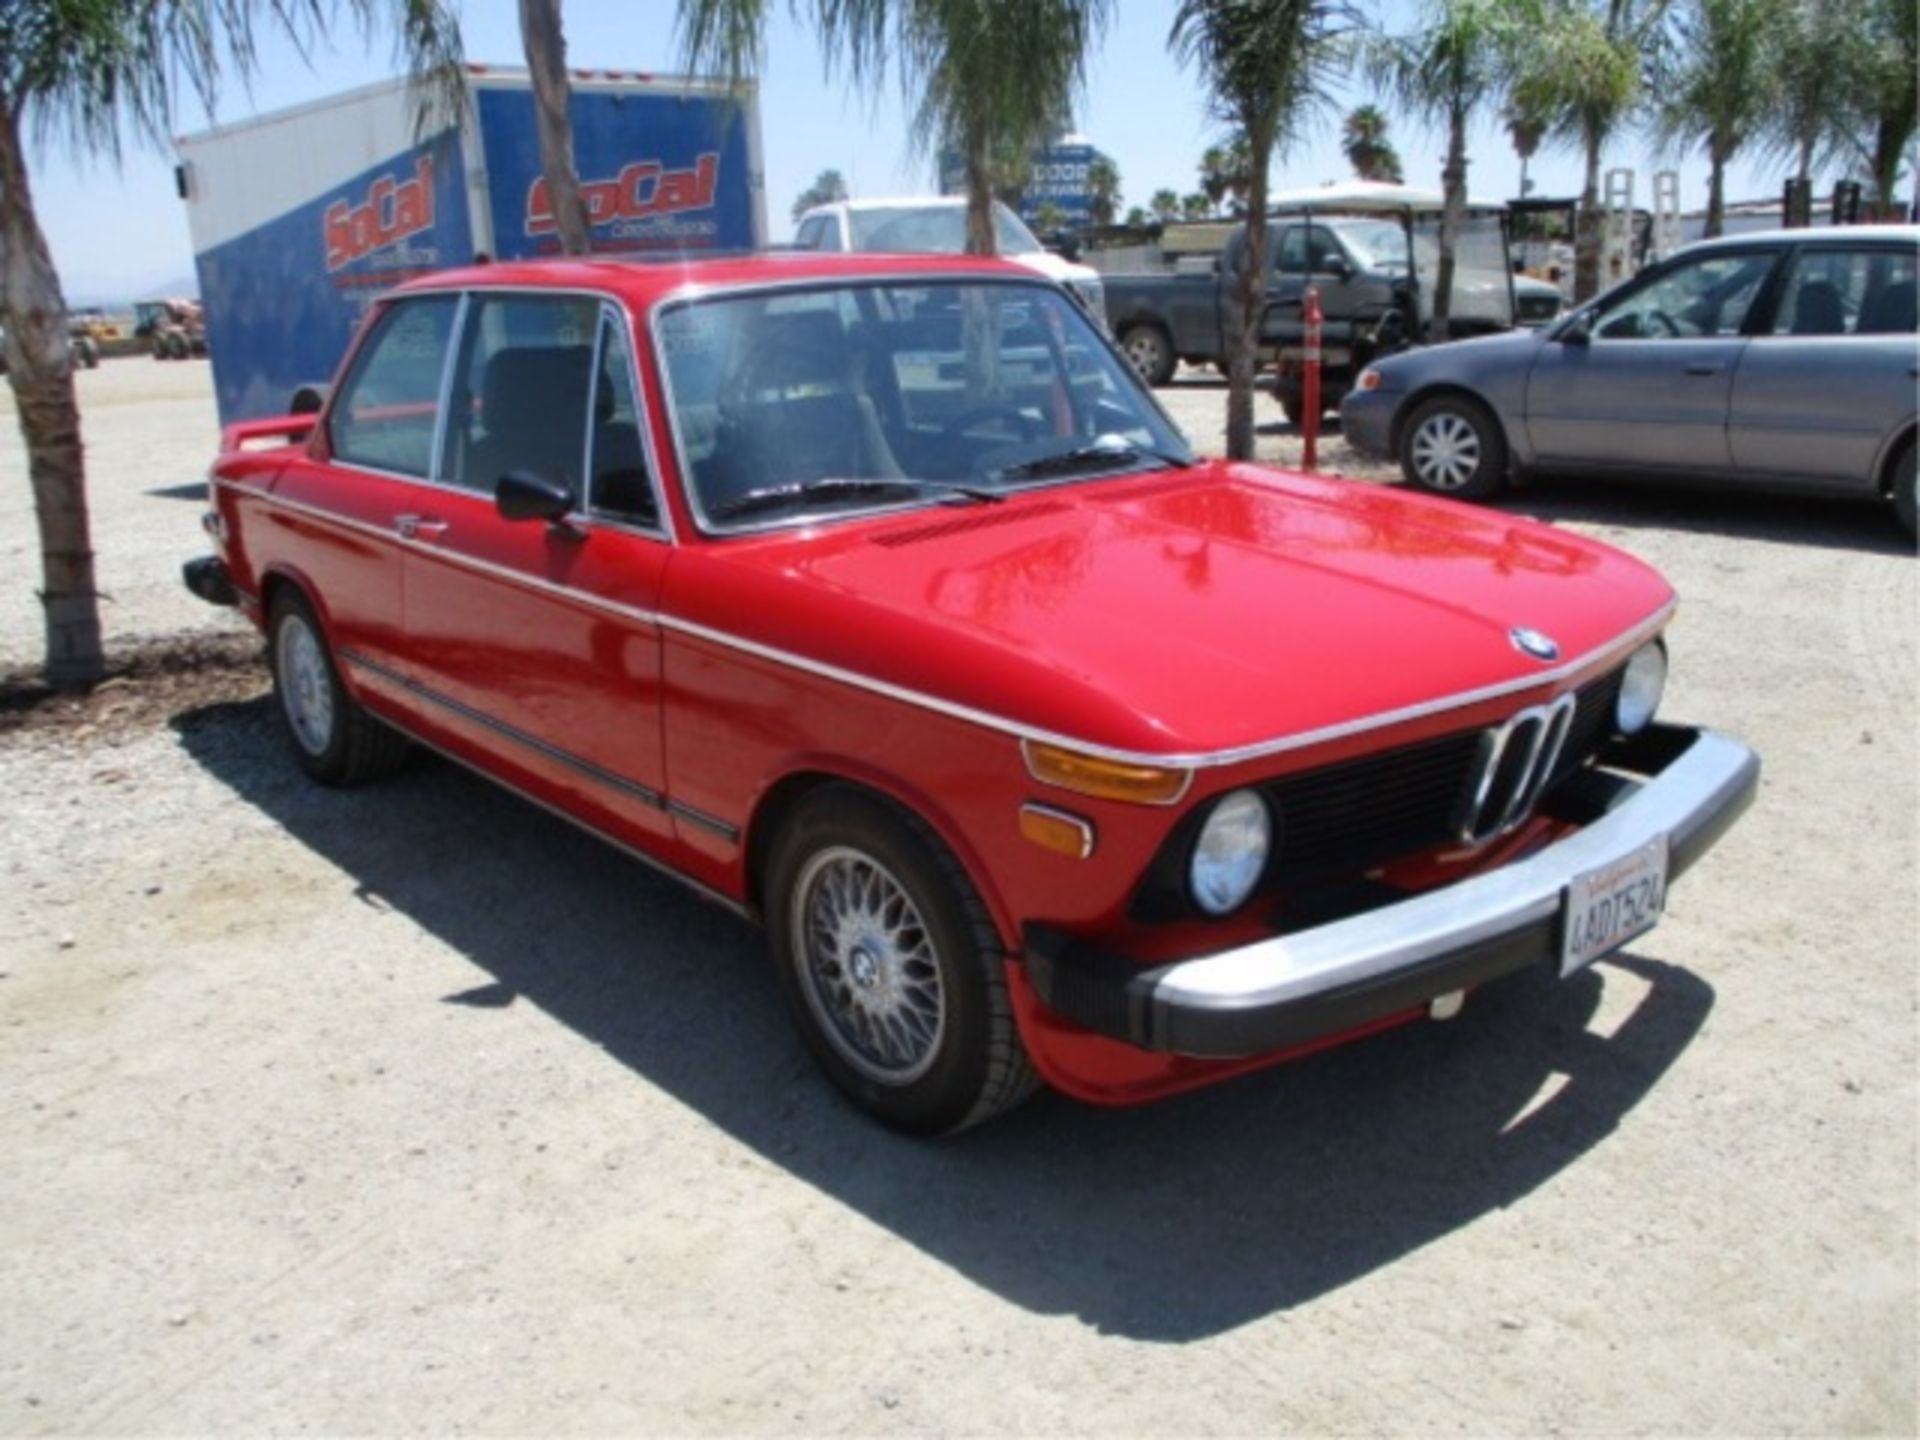 1972 BMW 2002ti Coupe, M10 4-Cyl Gas, 4-Speed Manual, S/N: 2761619, Mile/Hours - 49518 - Image 6 of 79